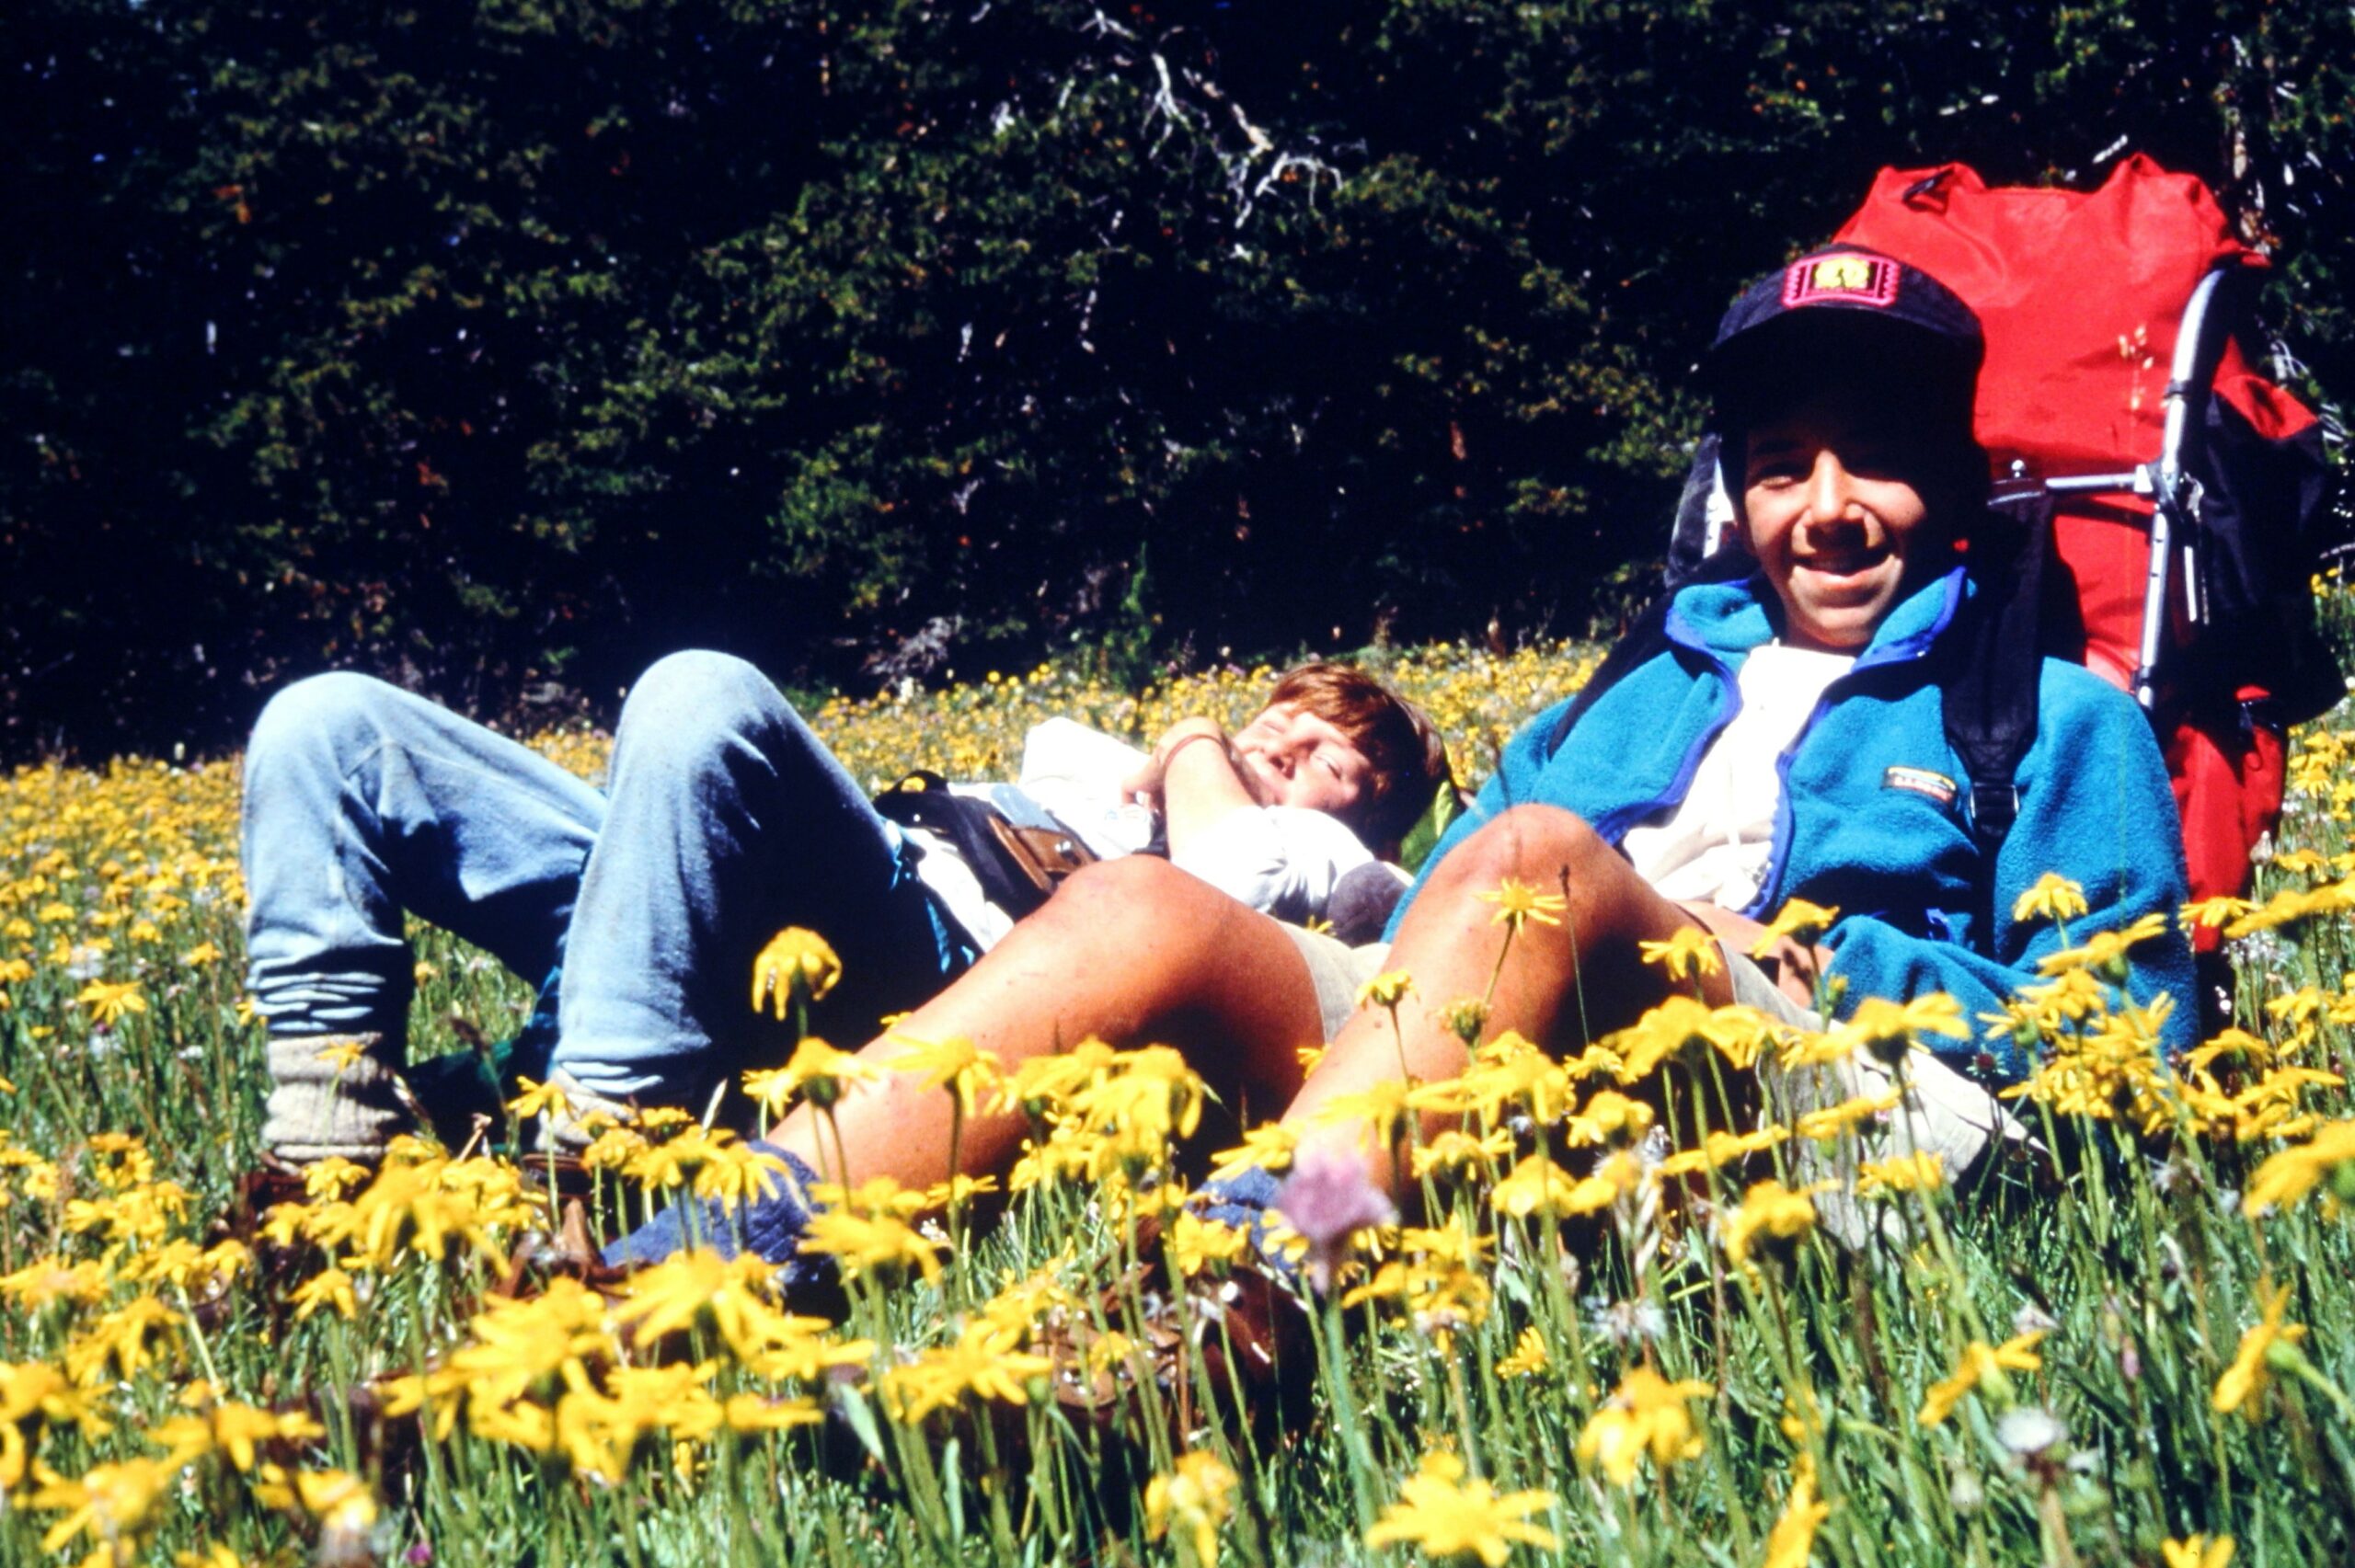 1993 Laying in the flowers